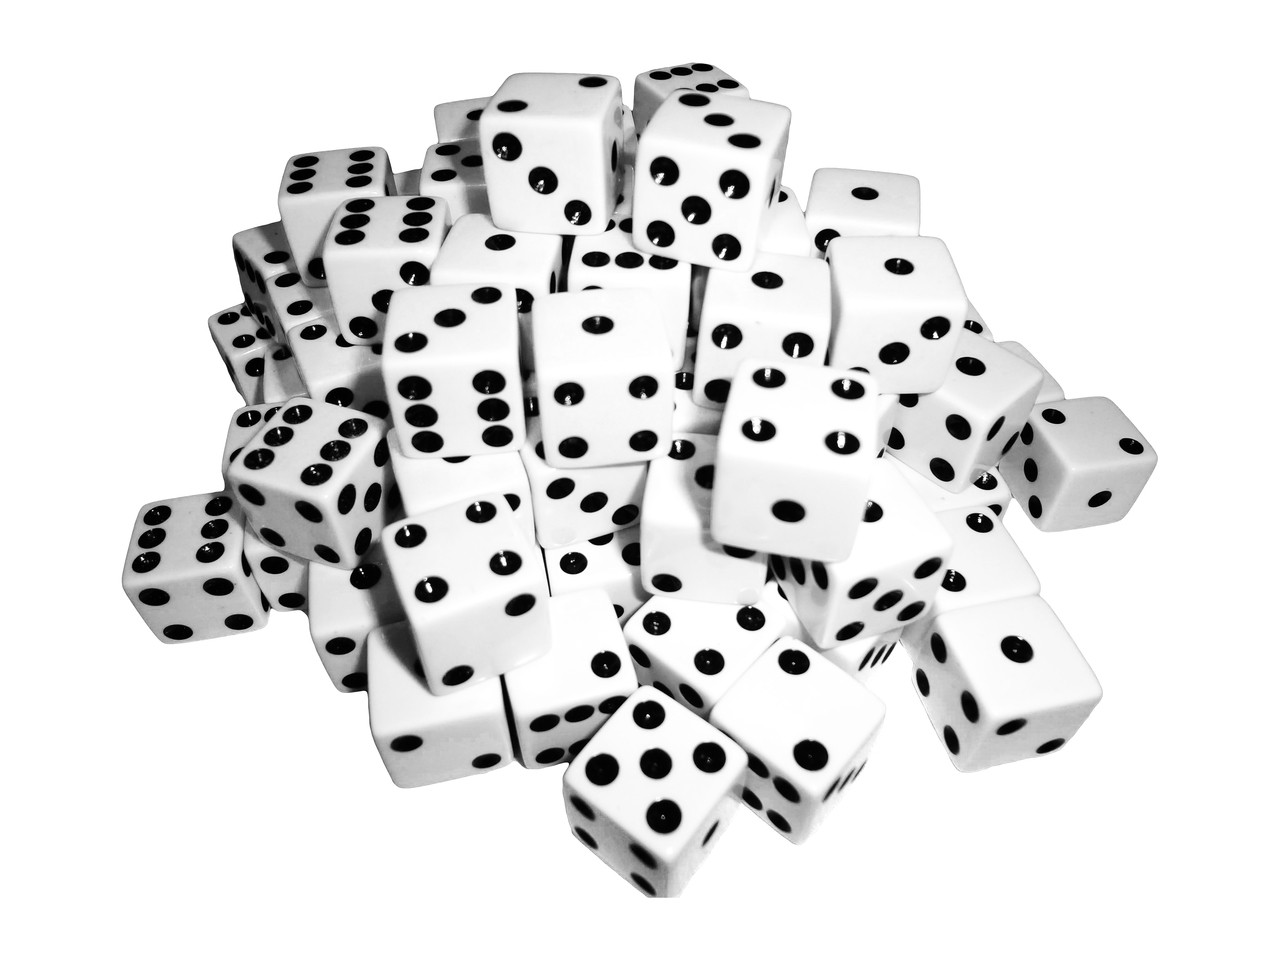 16mm White Acrylic Cubes Blank Dice For Board Games,math Counting